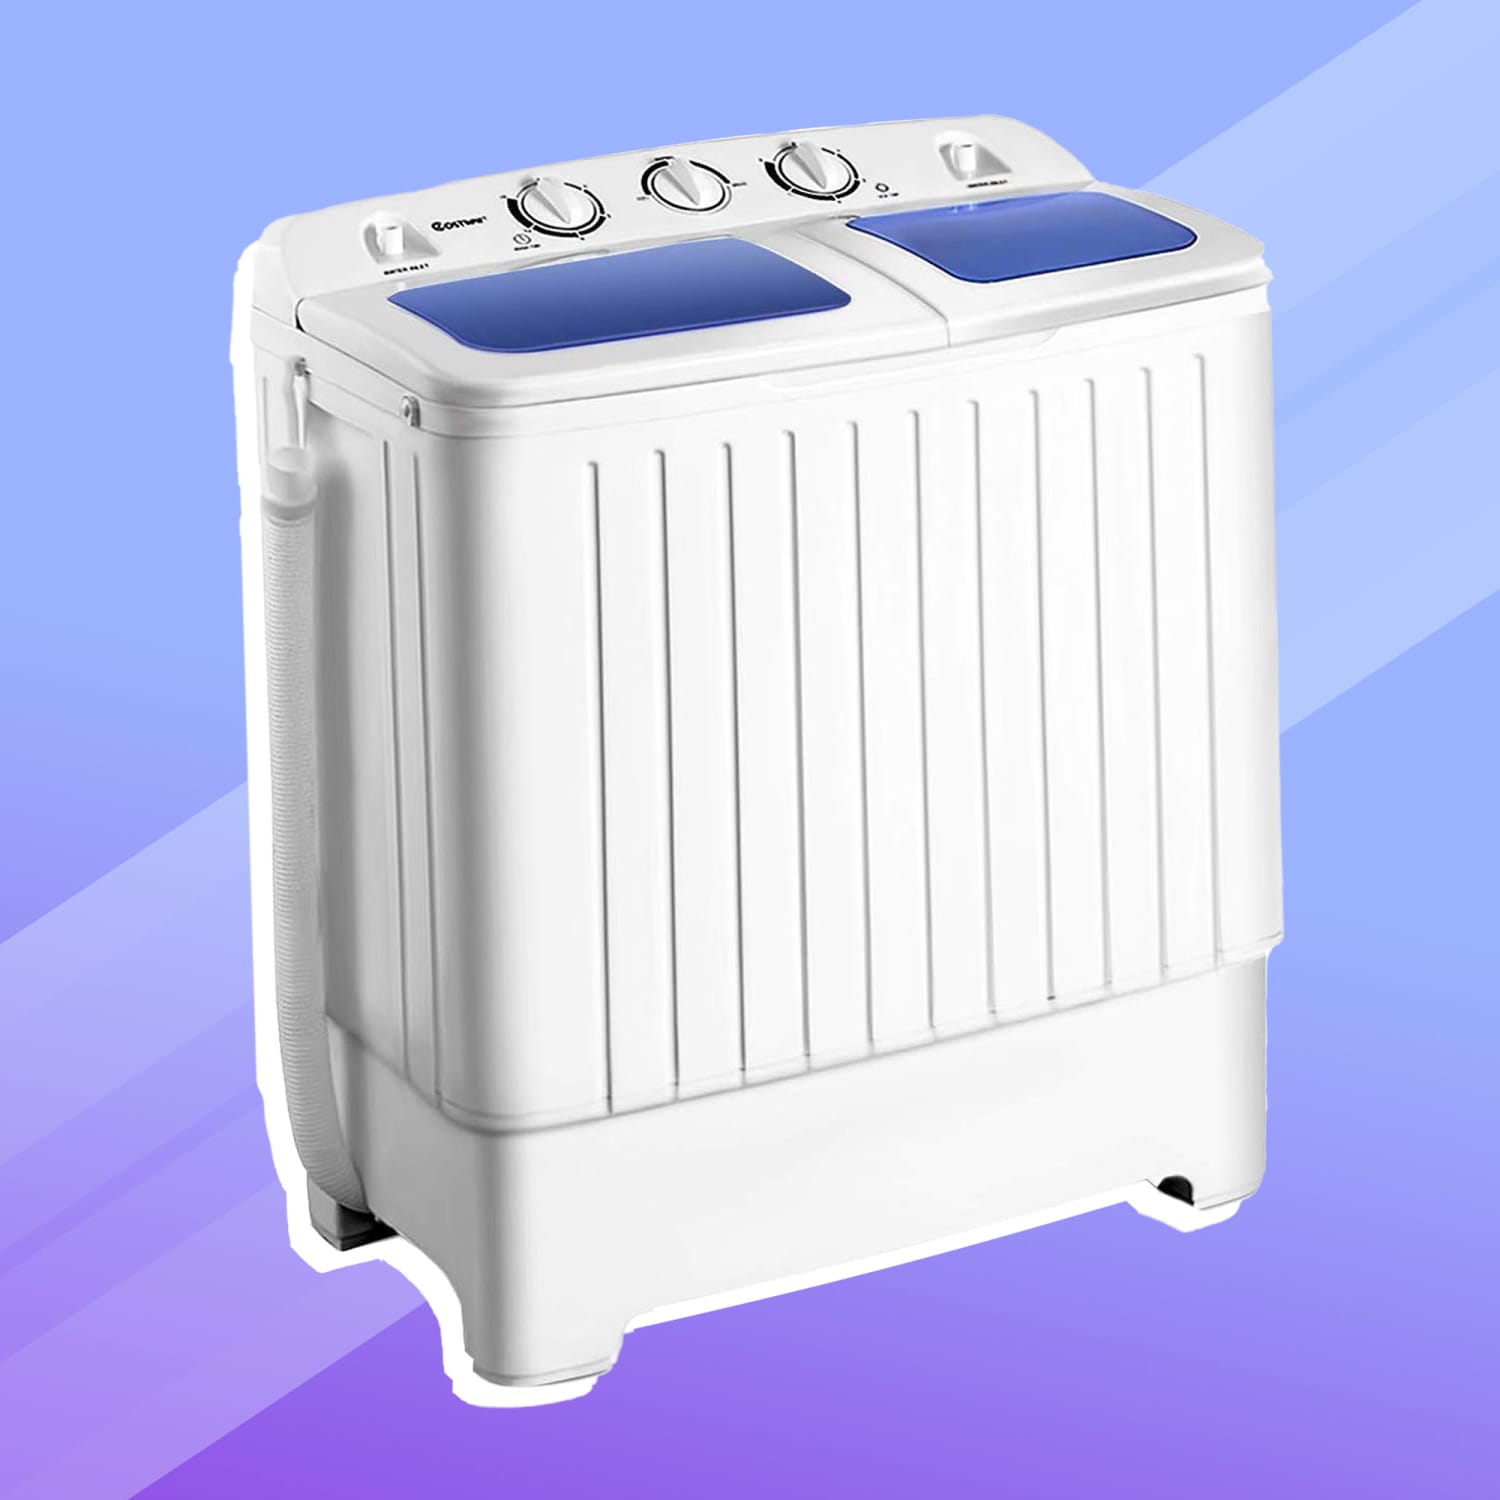 How My Portable Washing Machine Makes Small Apartment Living Bearable